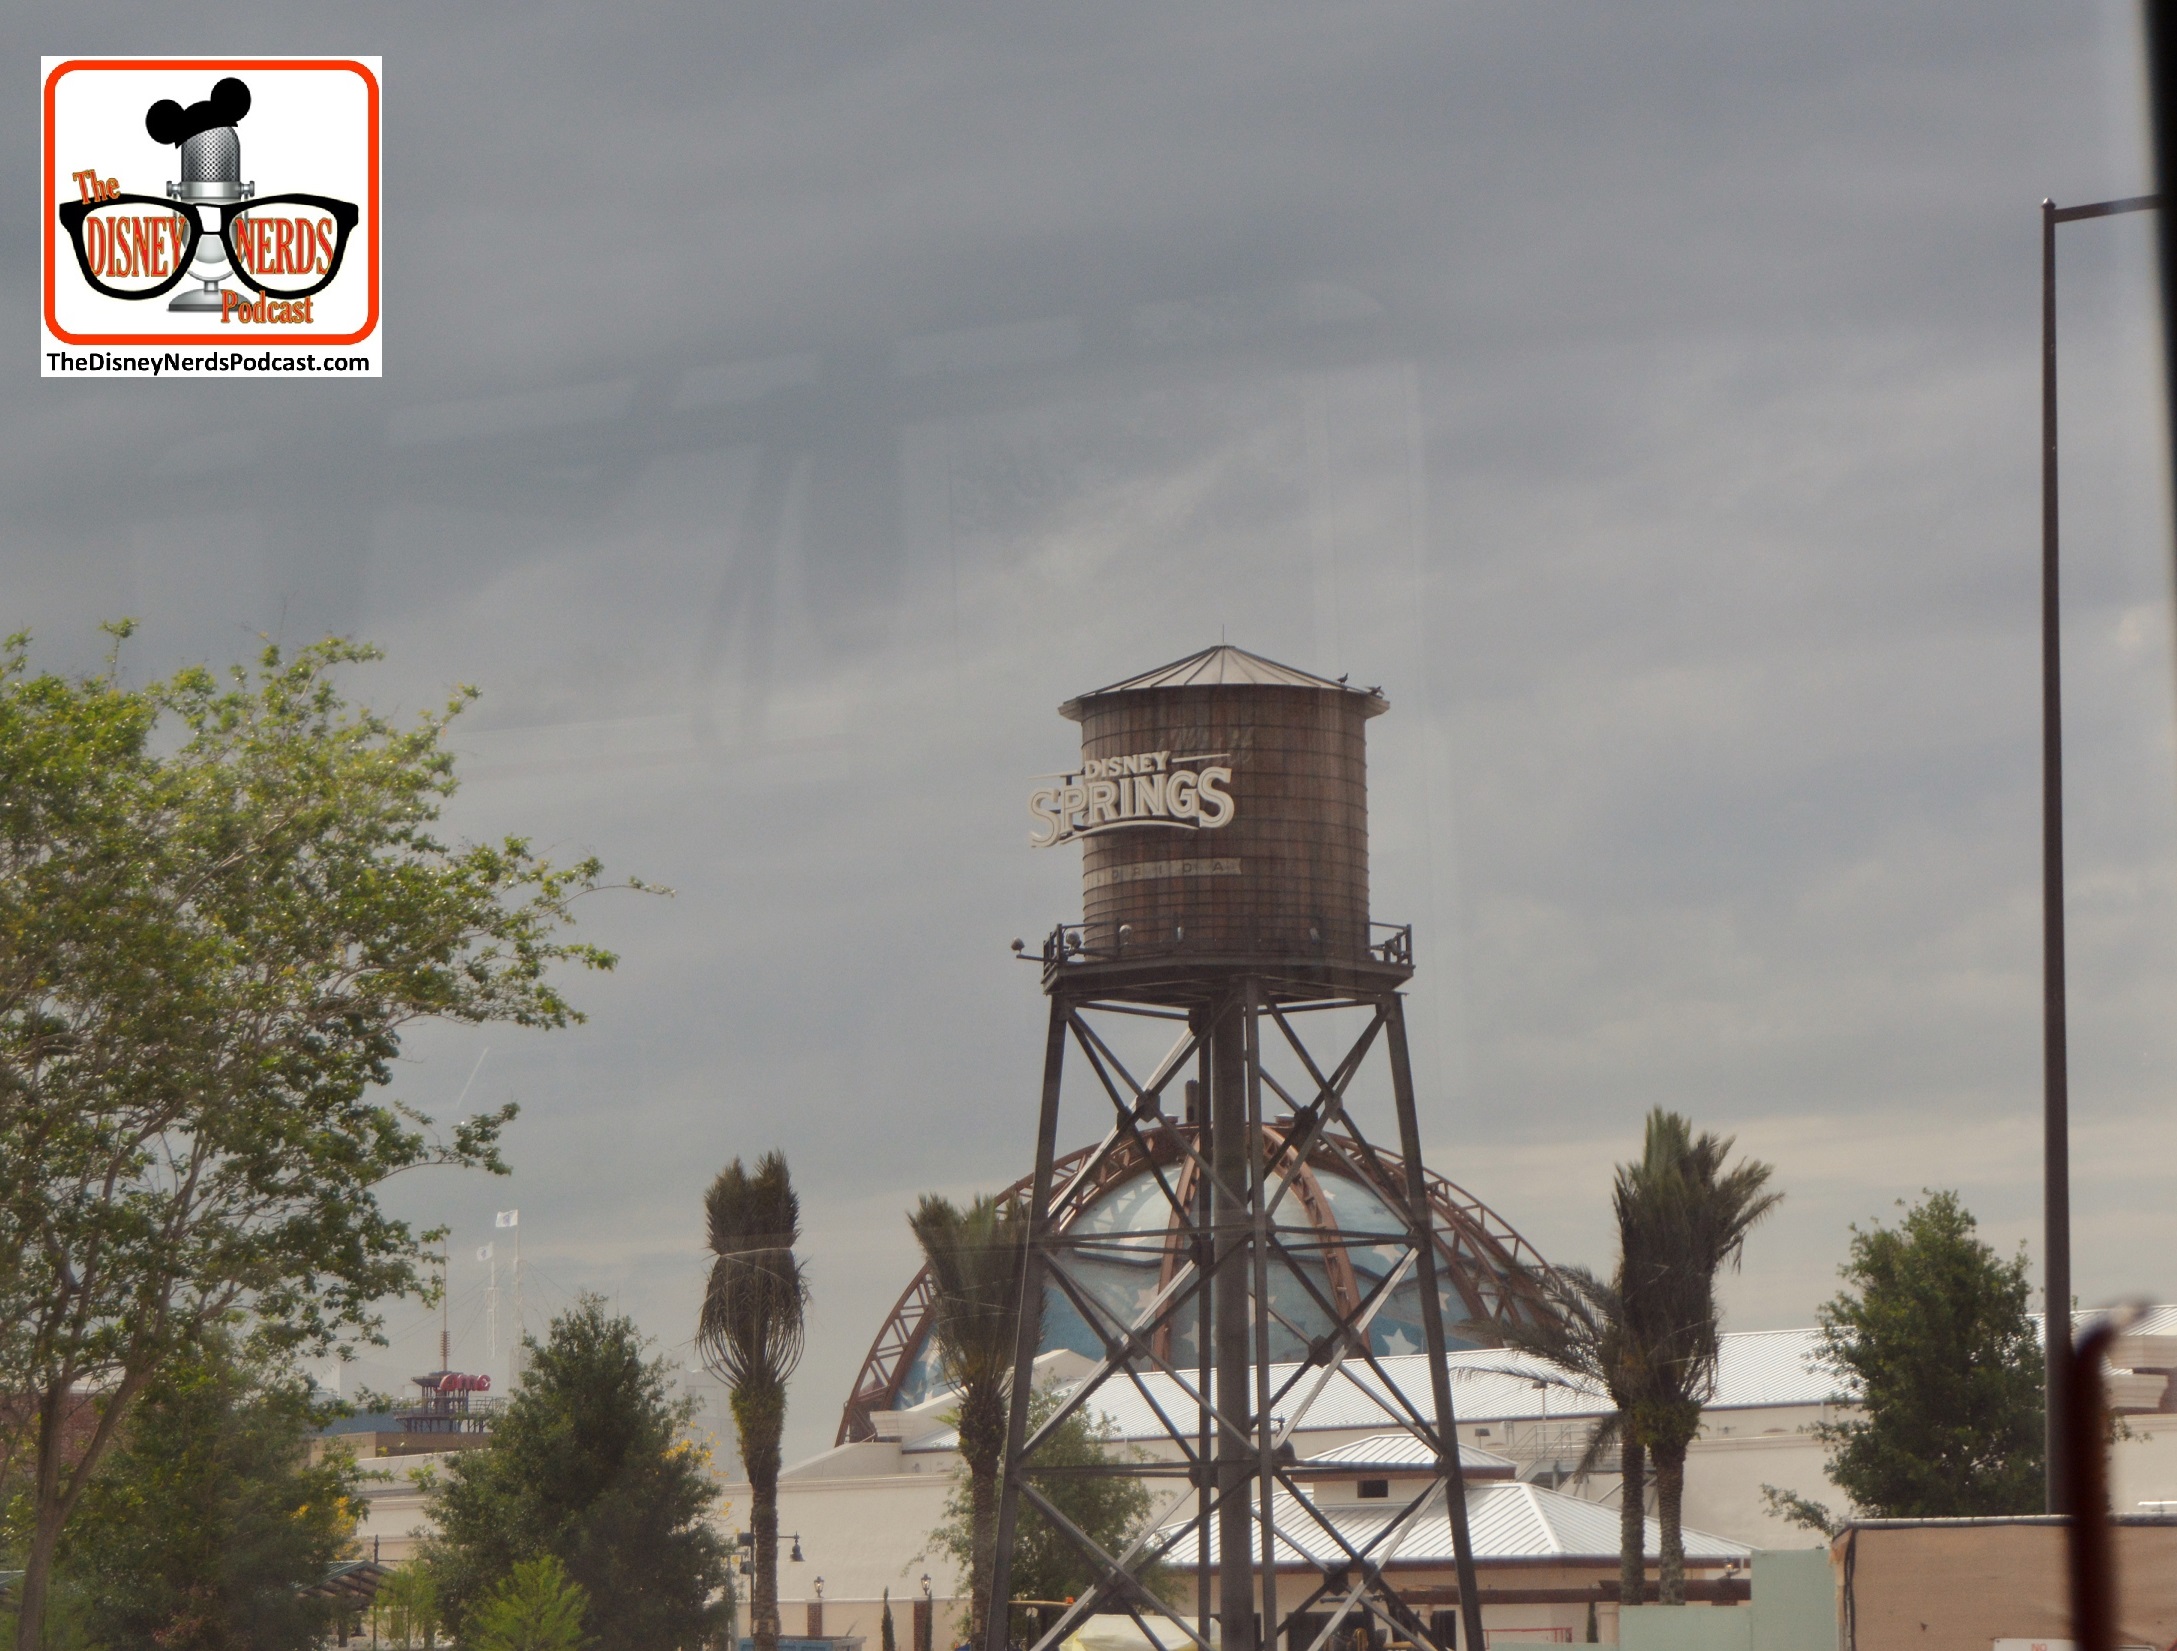 DNP April 2016 Photo Report: Disney Springs: I can 100% verify that the new Water Tower at Disney Springs is NOT the old Earful tower from Hollywood Studios - The Earful tower can still been seen when watching Star Wars Fireworks - Wishful thinking... but it's a new water tower,